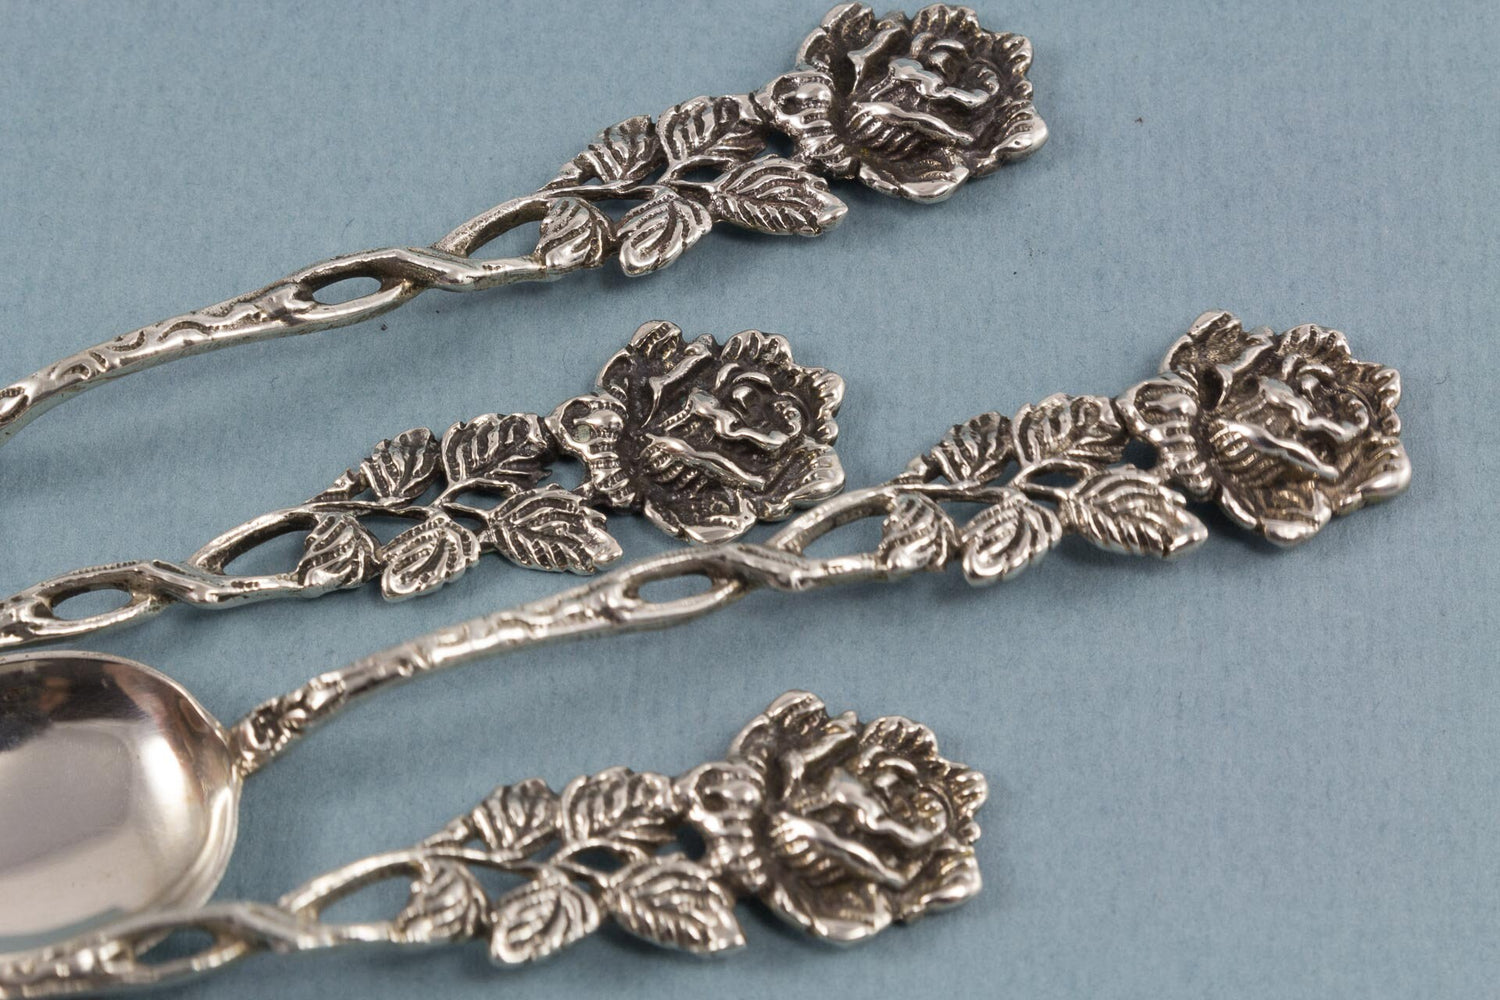 4 mocha spoons made of 835er silver, espresso spoon with roses 